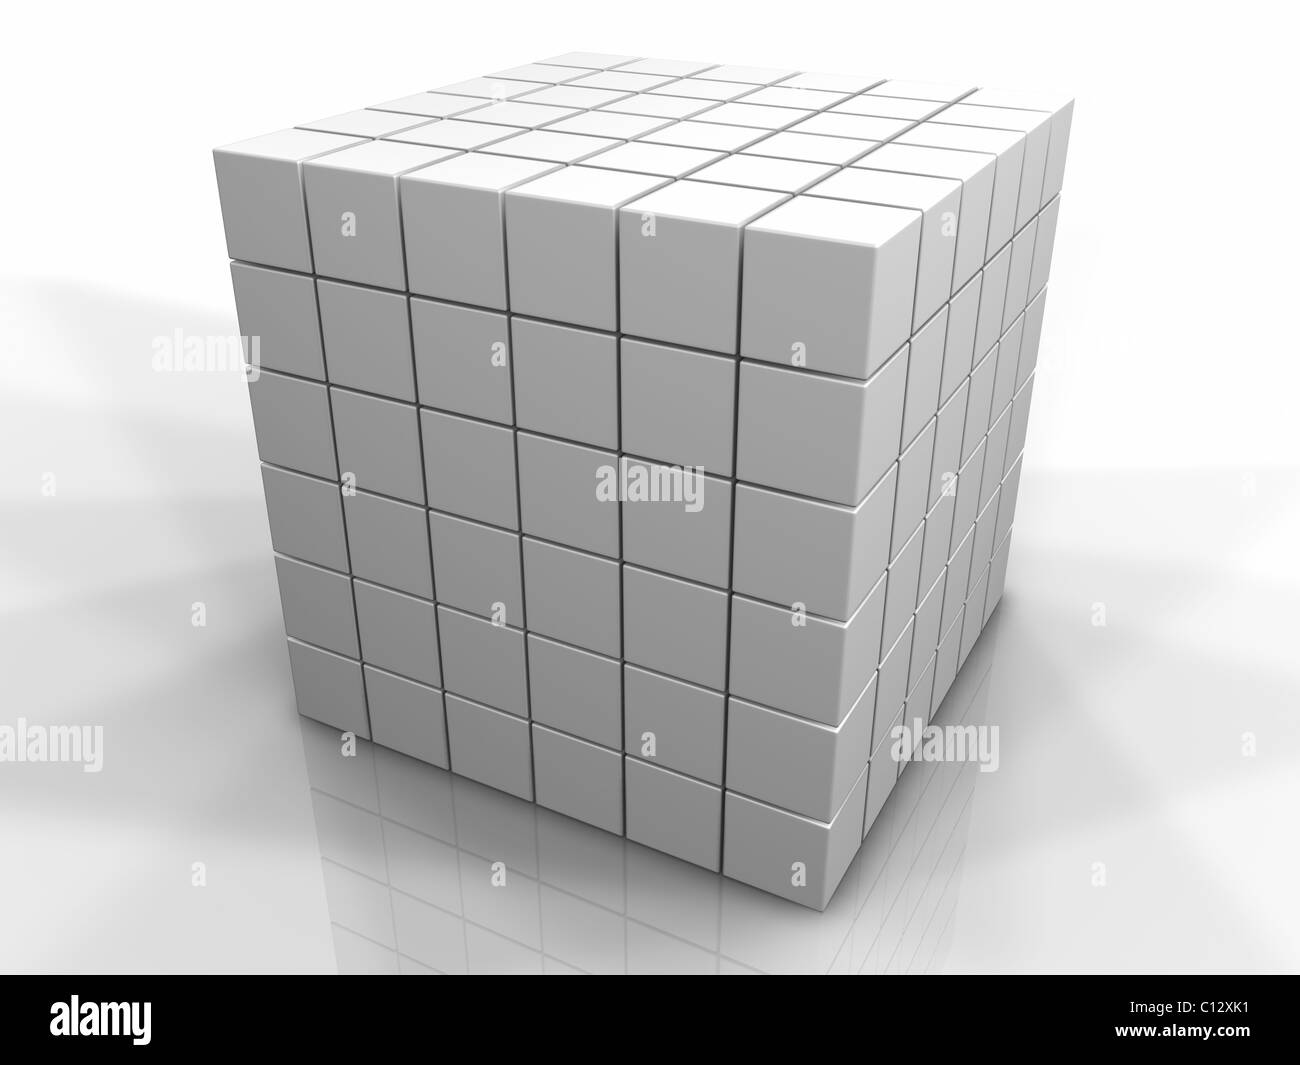 Large cube made of small cubes, abstract 3D rendering Stock Photo